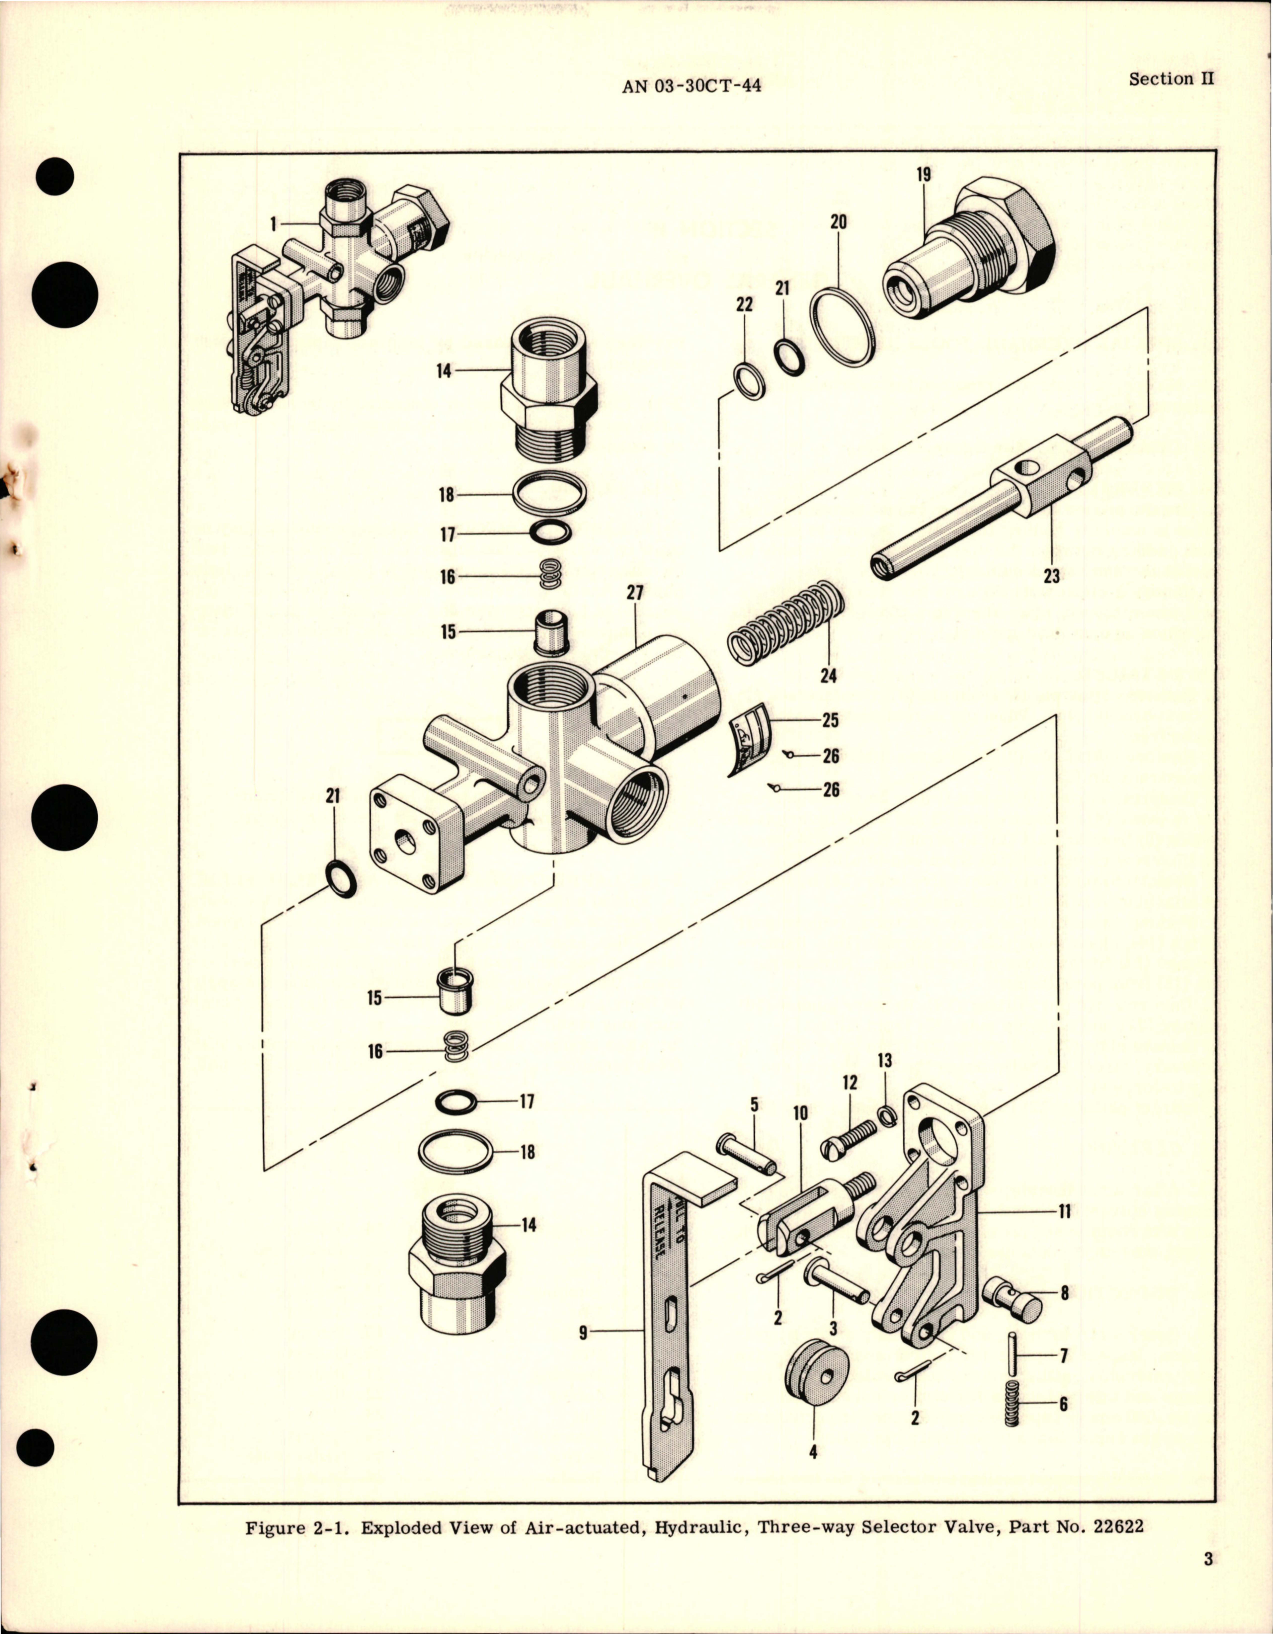 Sample page 5 from AirCorps Library document: Overhaul Instructions for Hydraulic Three Way Selector Valve - Part 22622